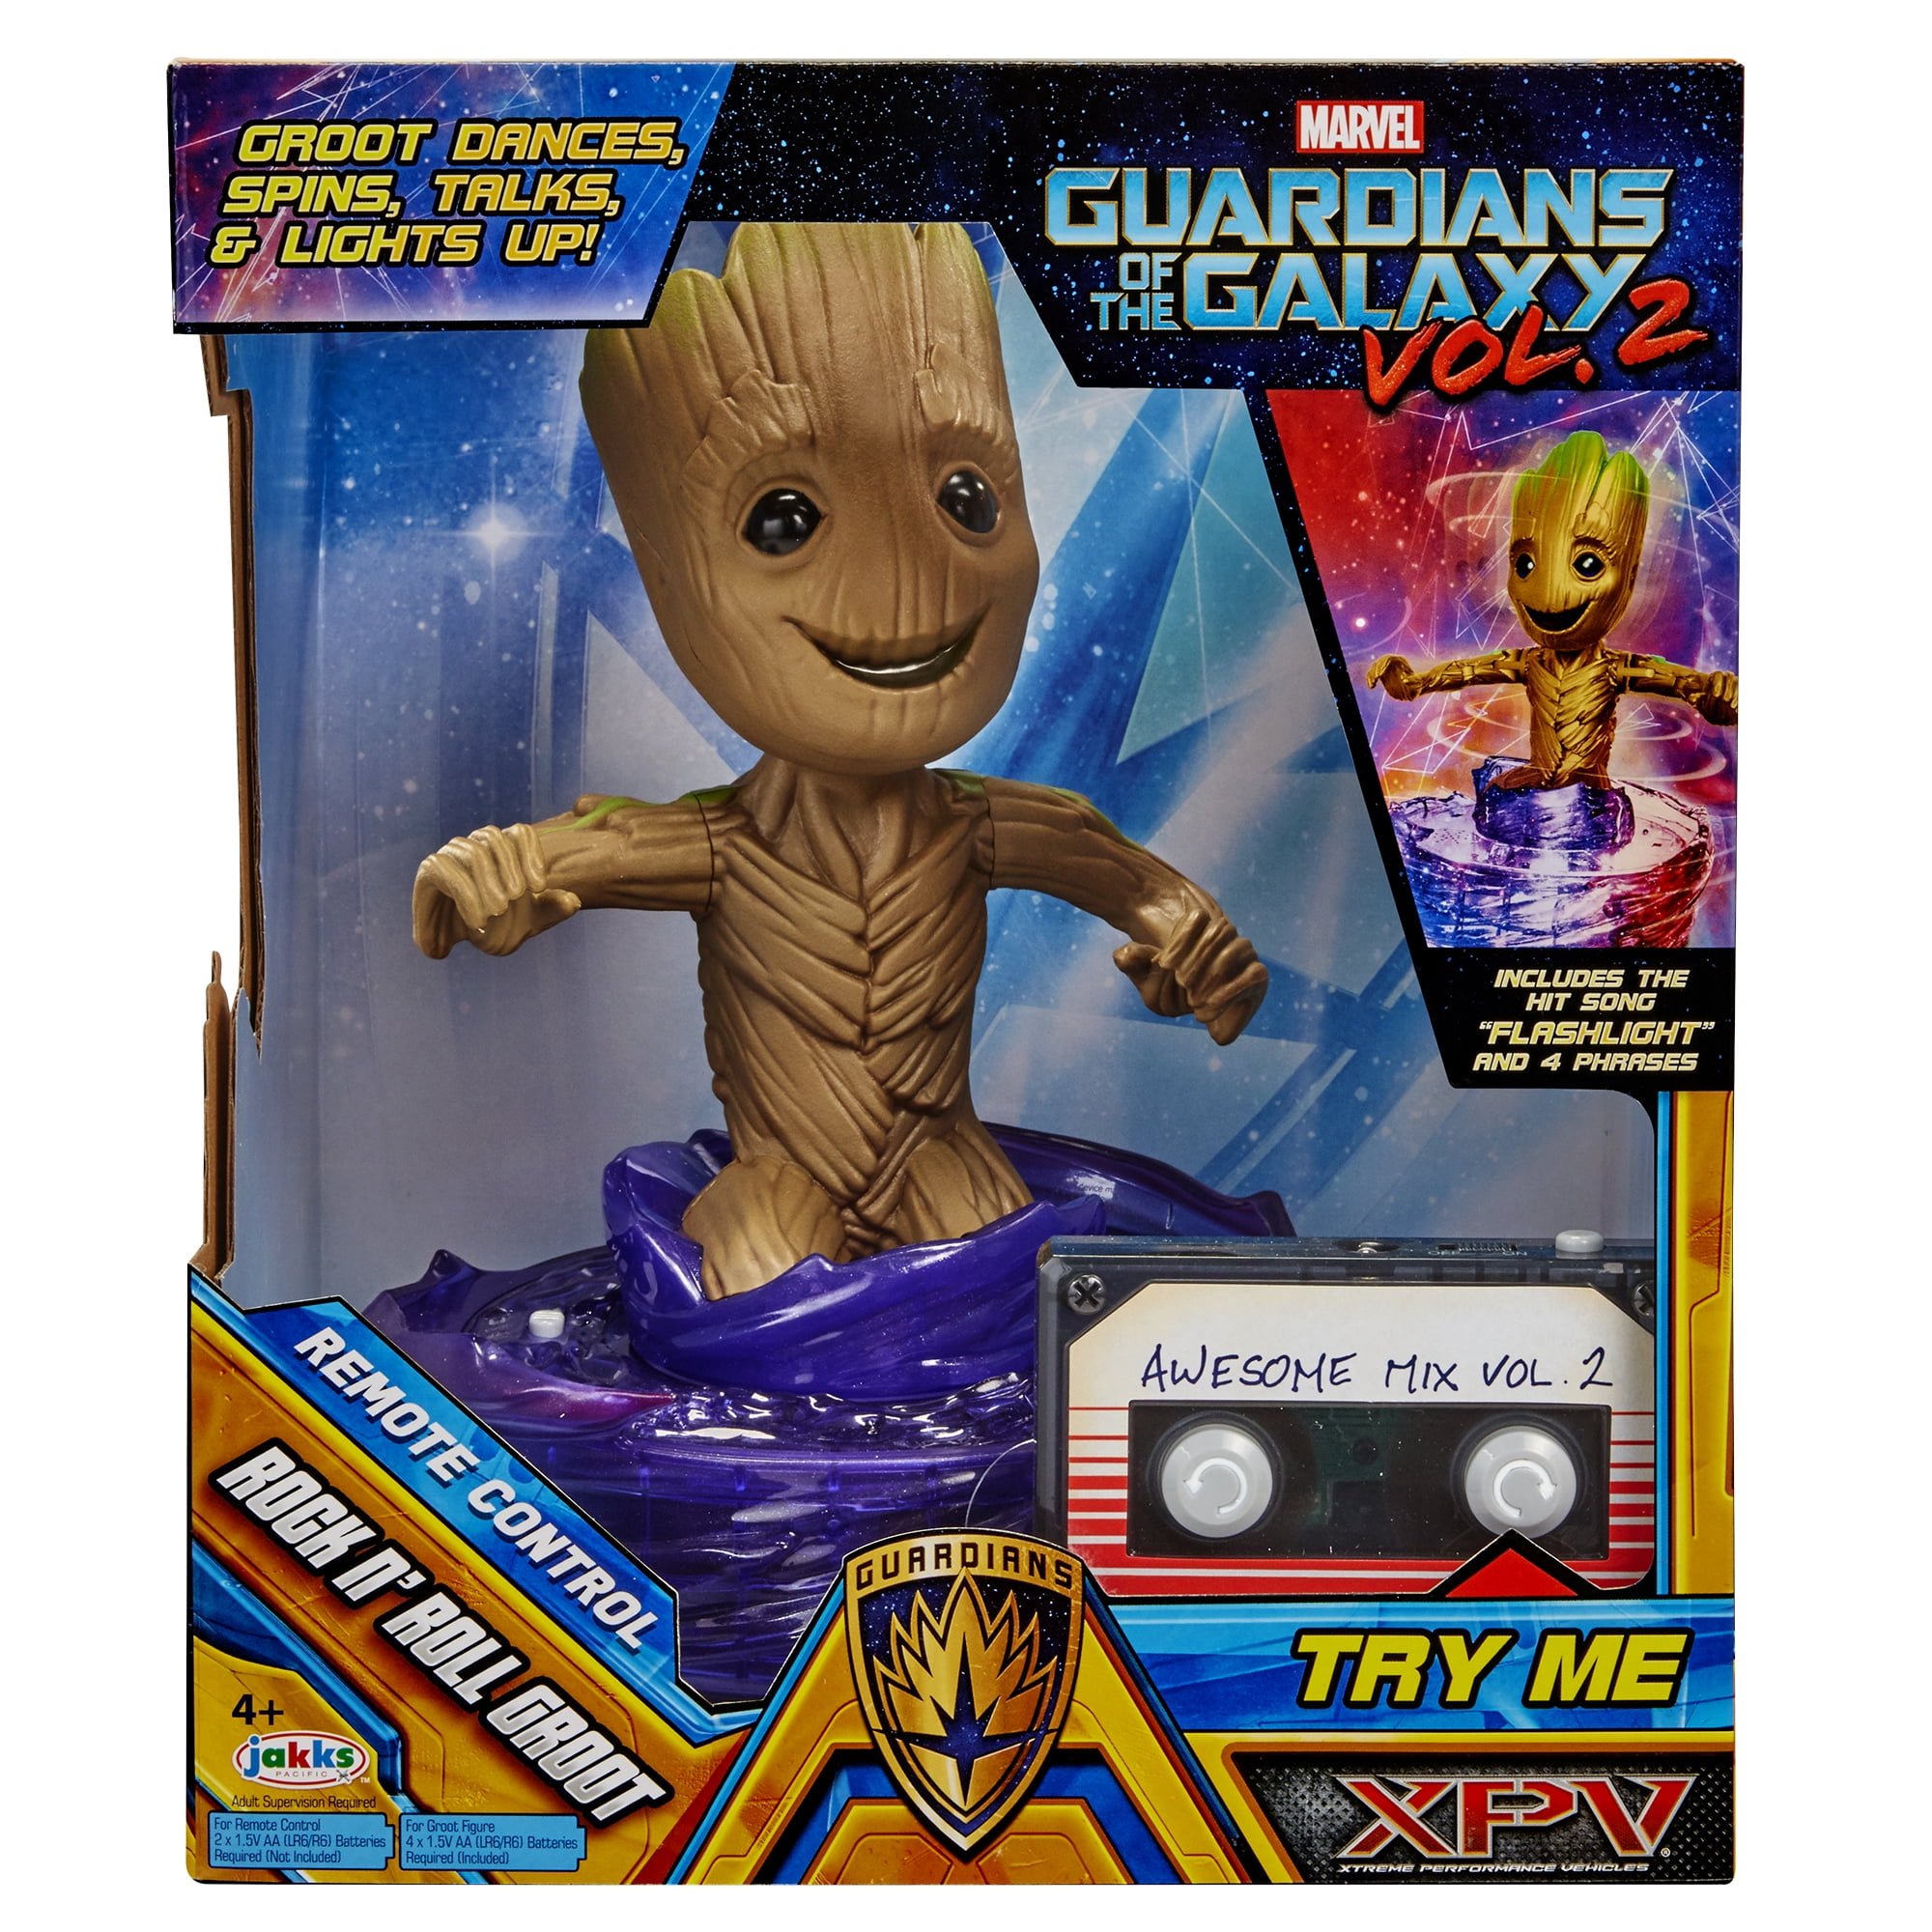 2 GROOT ROCKET Plush Dolls Toys 4 Styles New Marvel Guardians of the Galaxy Vol